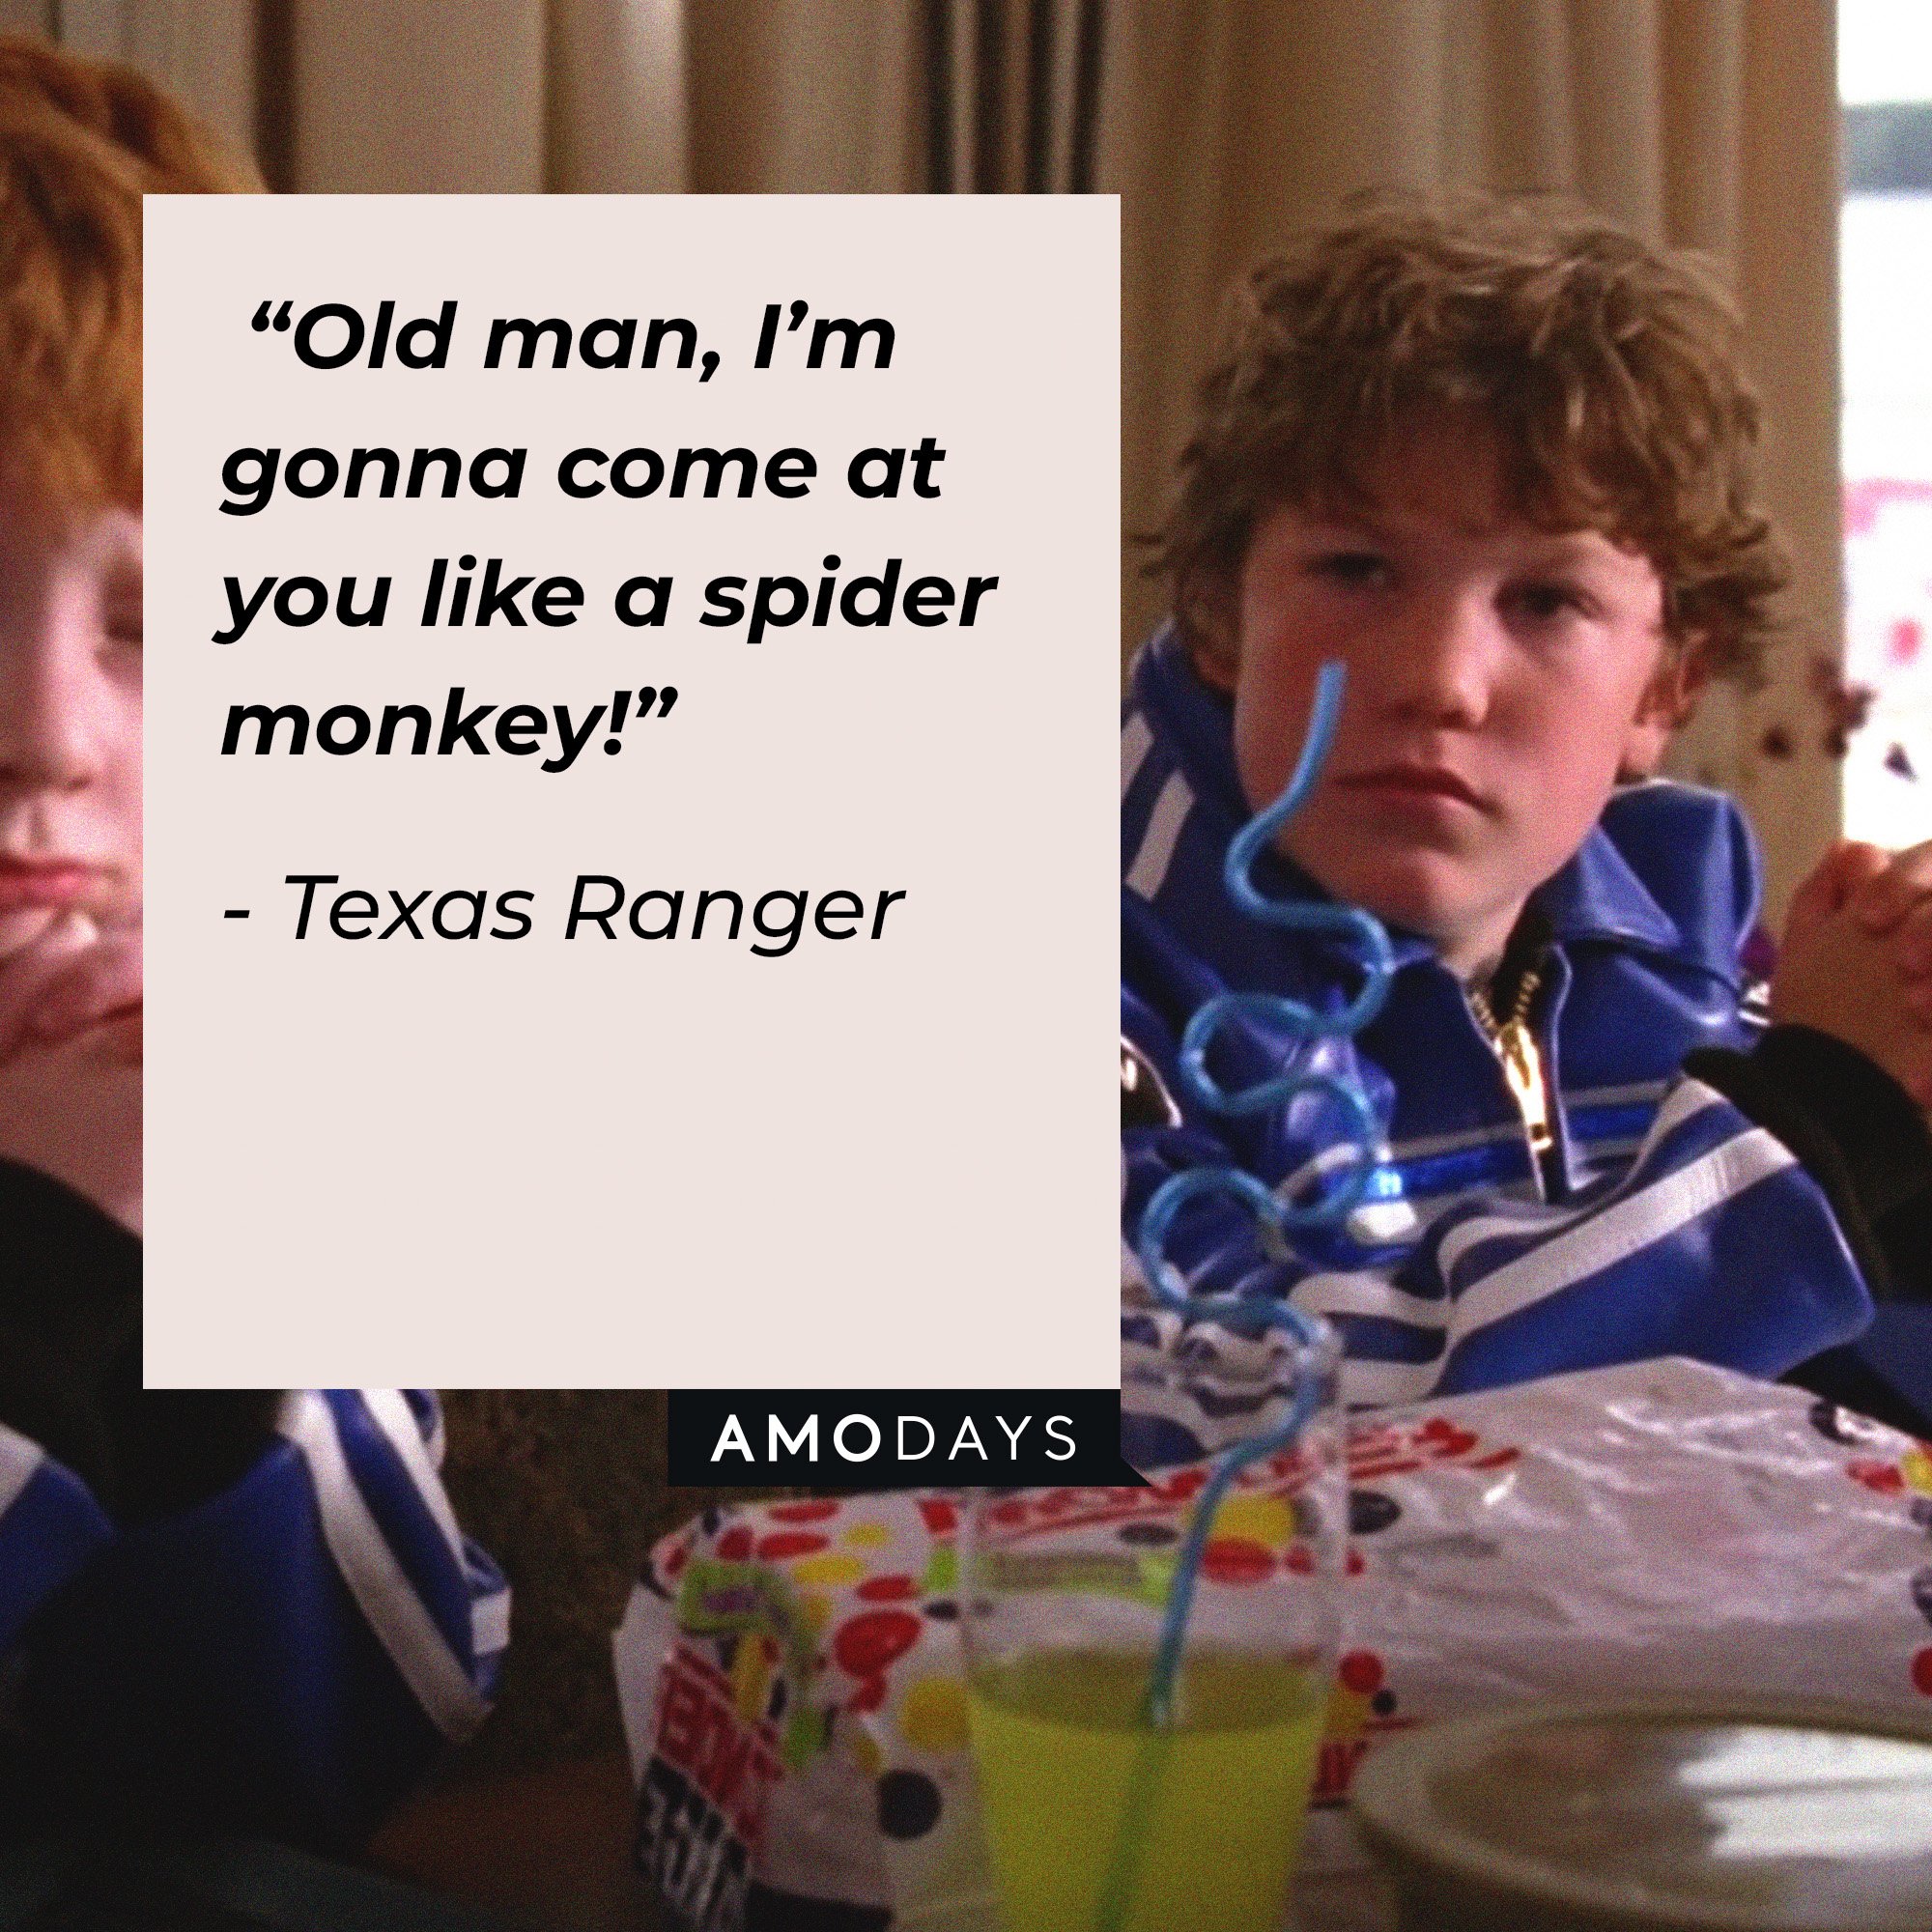 Texas Ranger’s quote: “Old man, I’m gonna come at you like a spider monkey!” | Image: AmoDays